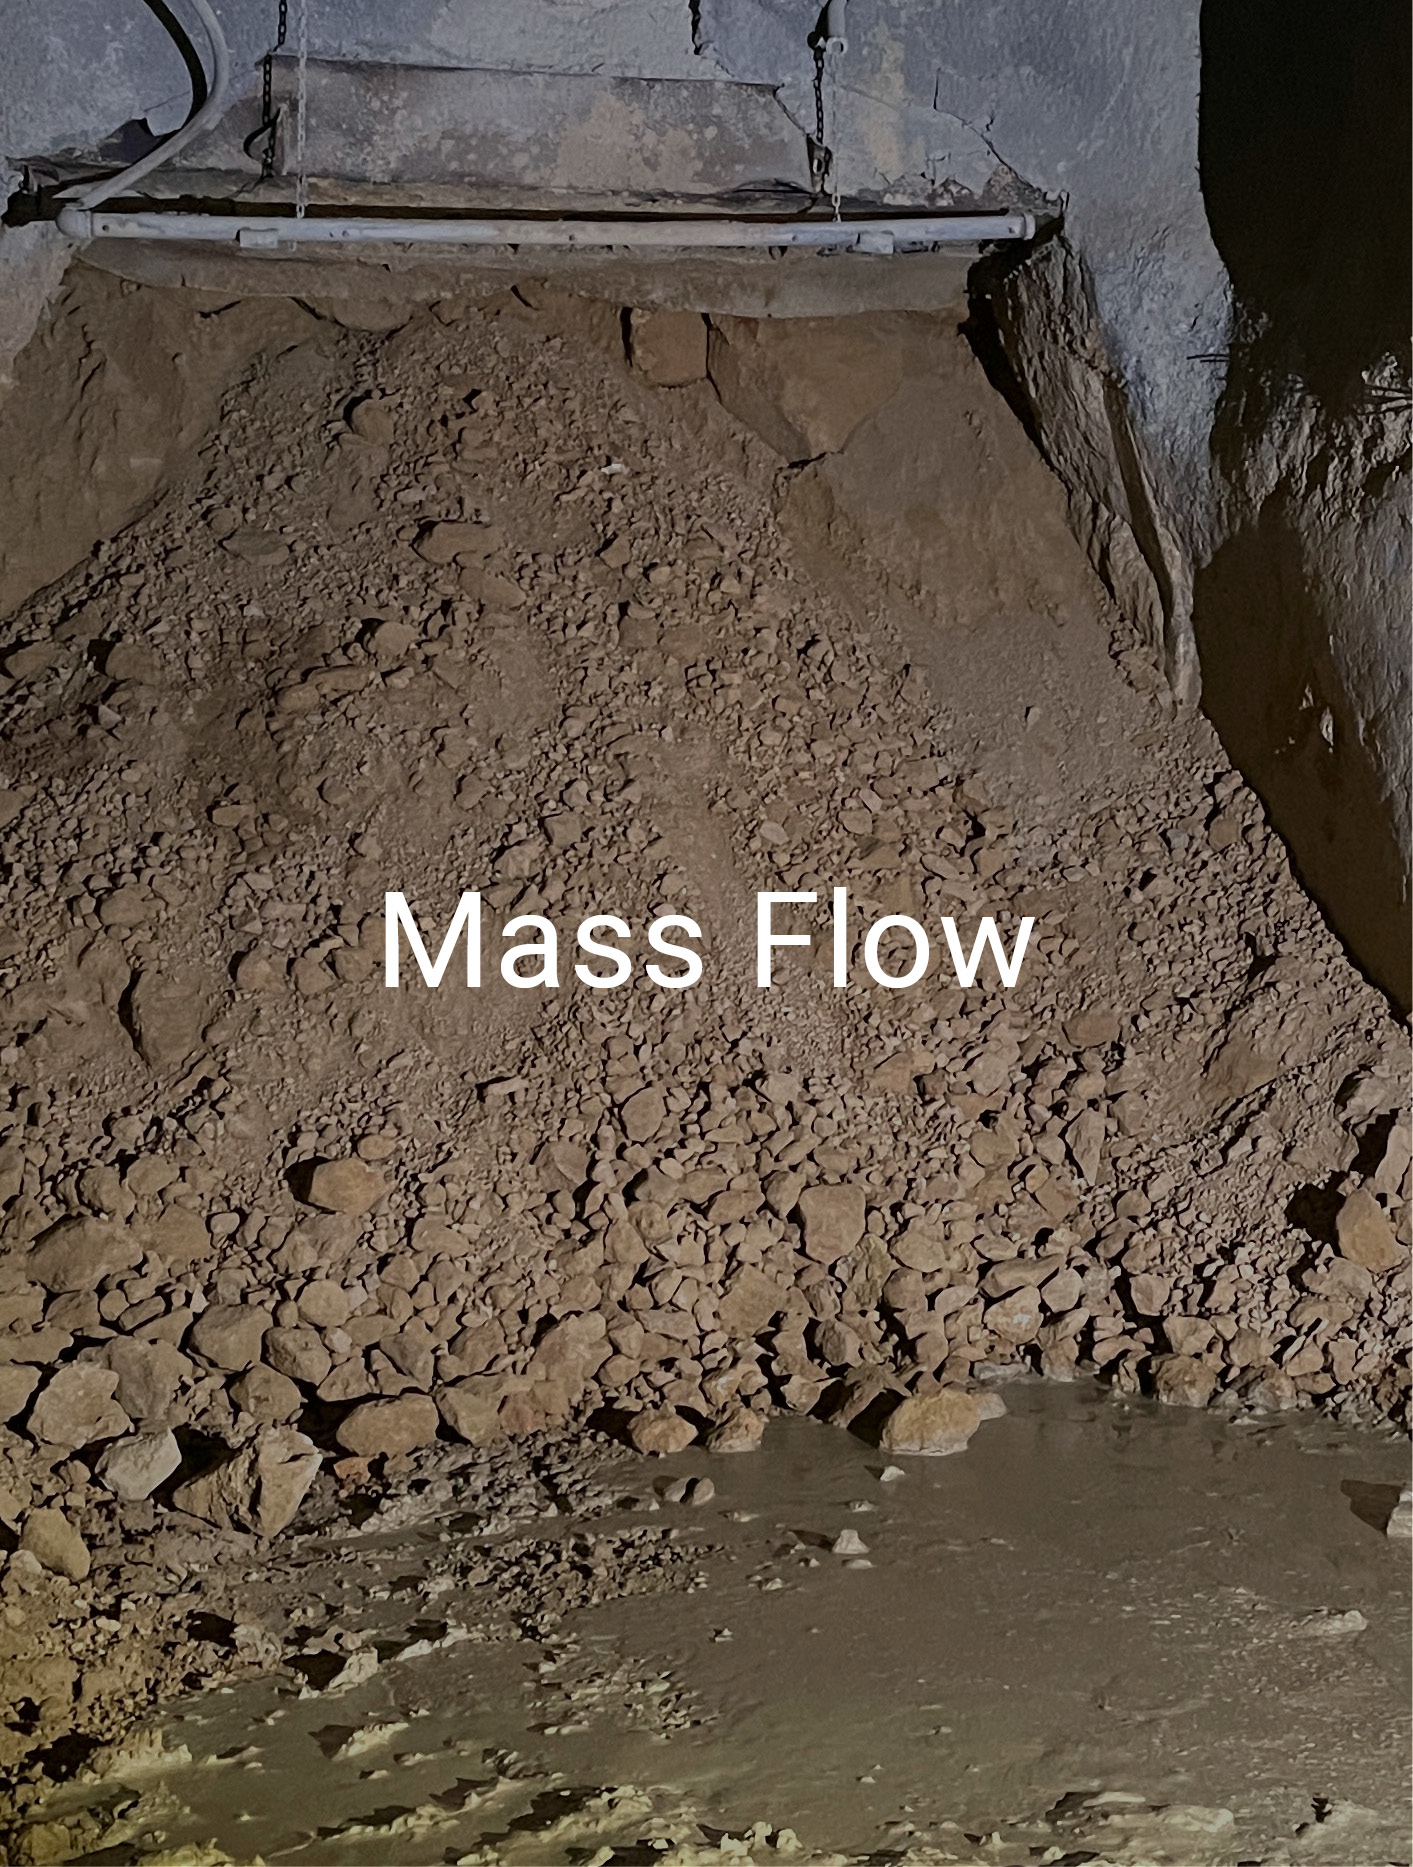 text 'Mass Flow' over background of mound of dirt and minerals